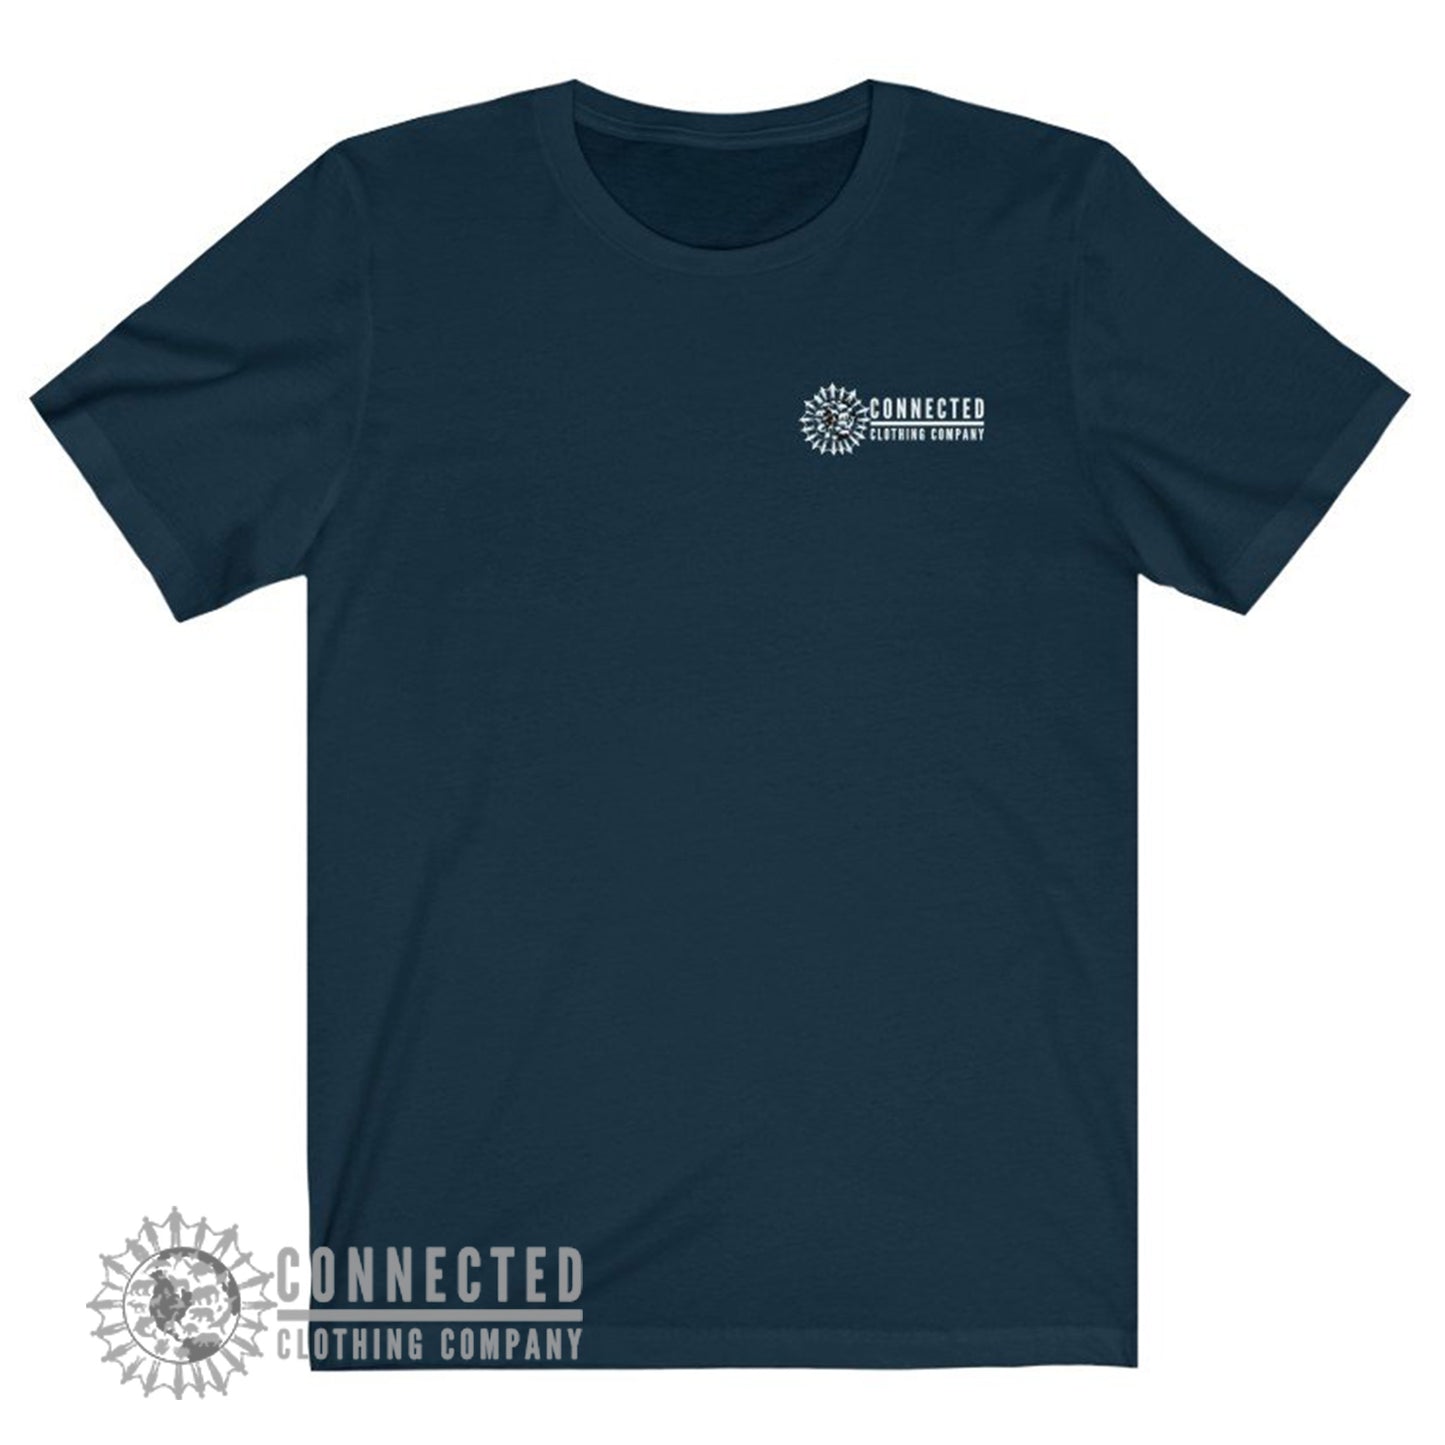 Front of Navy Show Humanity Short-Sleeve Tee shows Connected Clothing Company Logo - Connected Clothing Company - Ethically and Sustainably Made - 10% donated to animal rescue